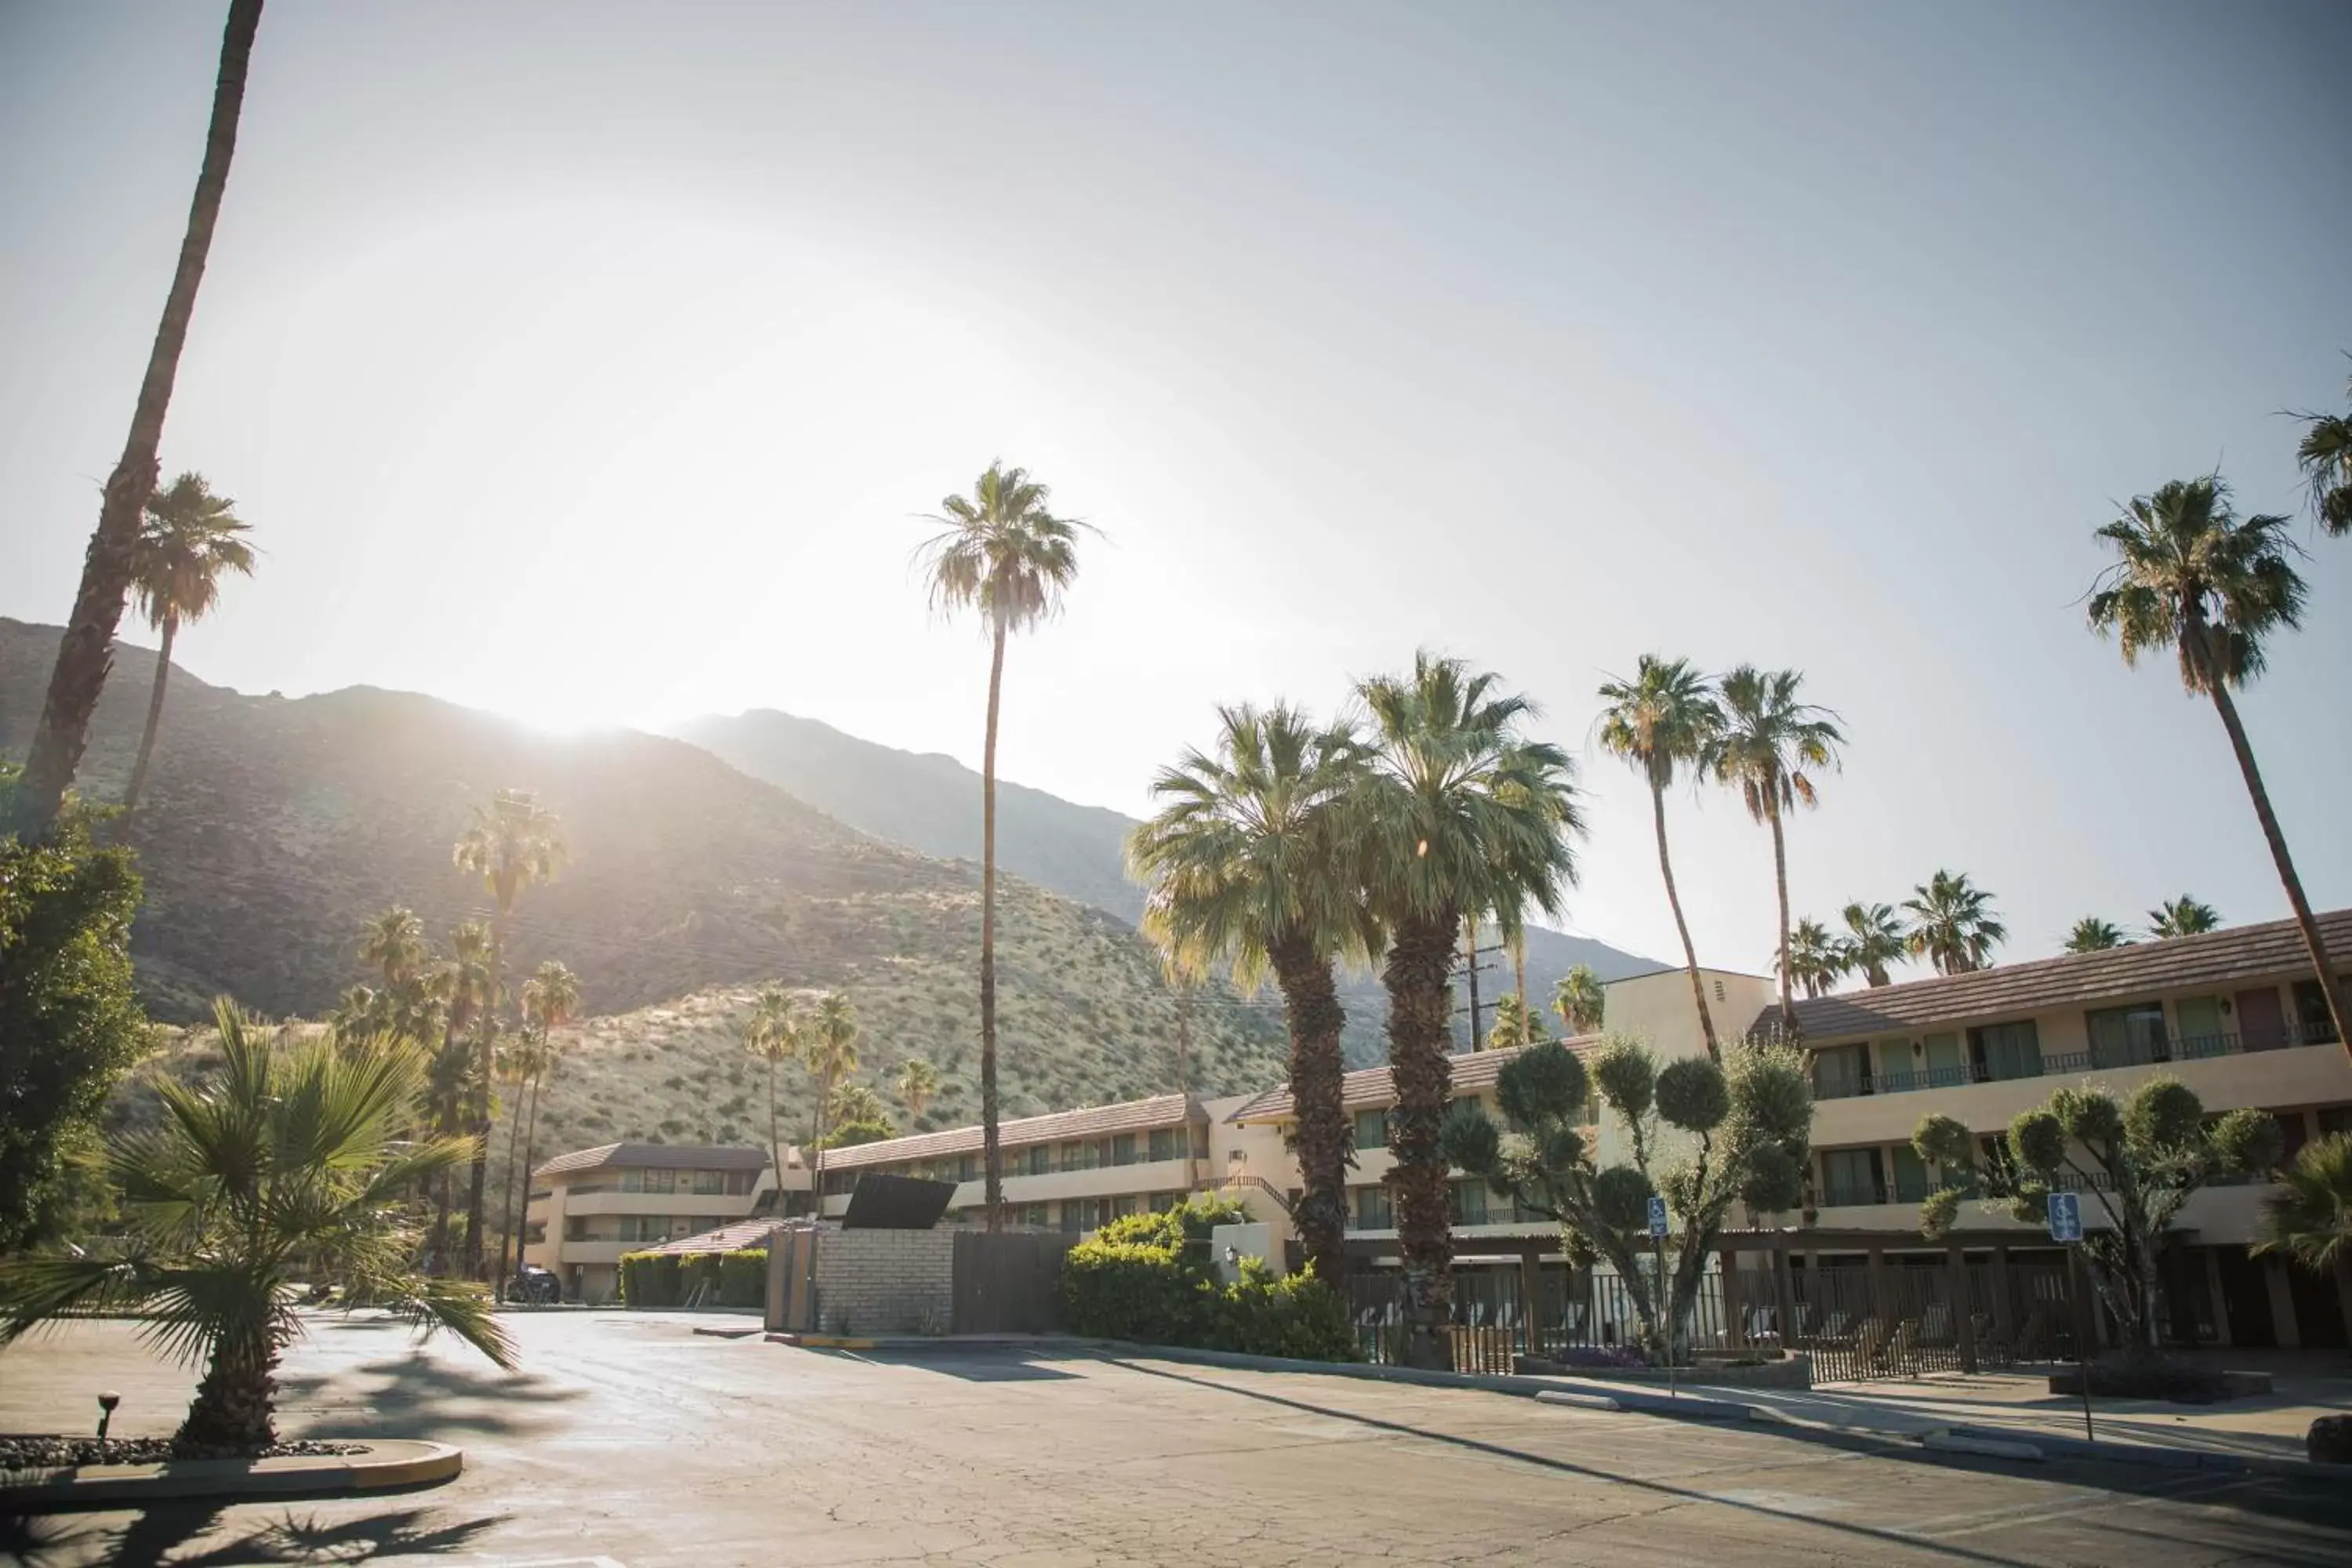 Area and facilities in Vagabond Motor Hotel - Palm Springs